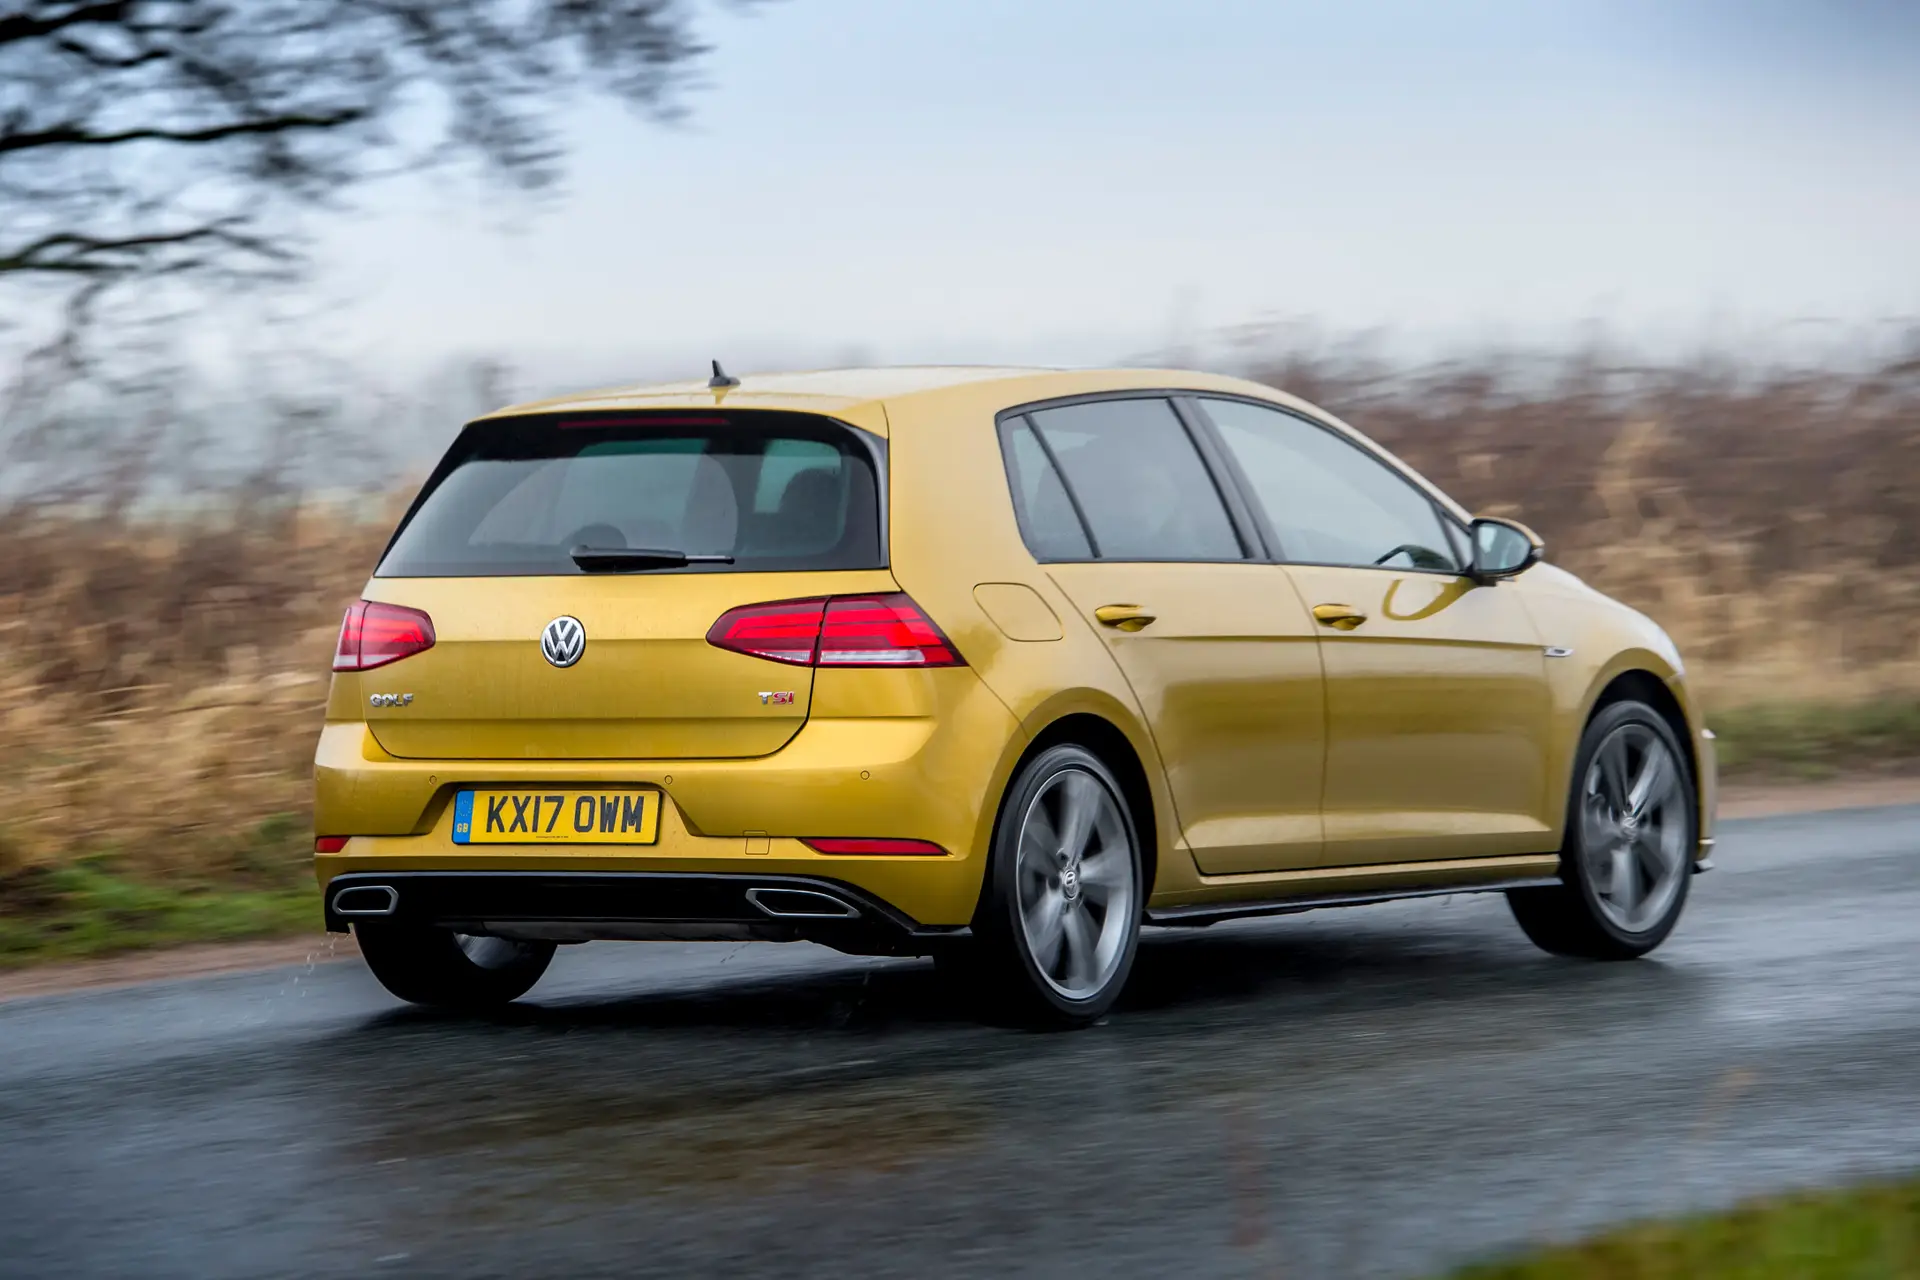 Volkswagen Golf (2013-202) Review: exterior rear three quarter photo of the Volkswagen Golf on the road